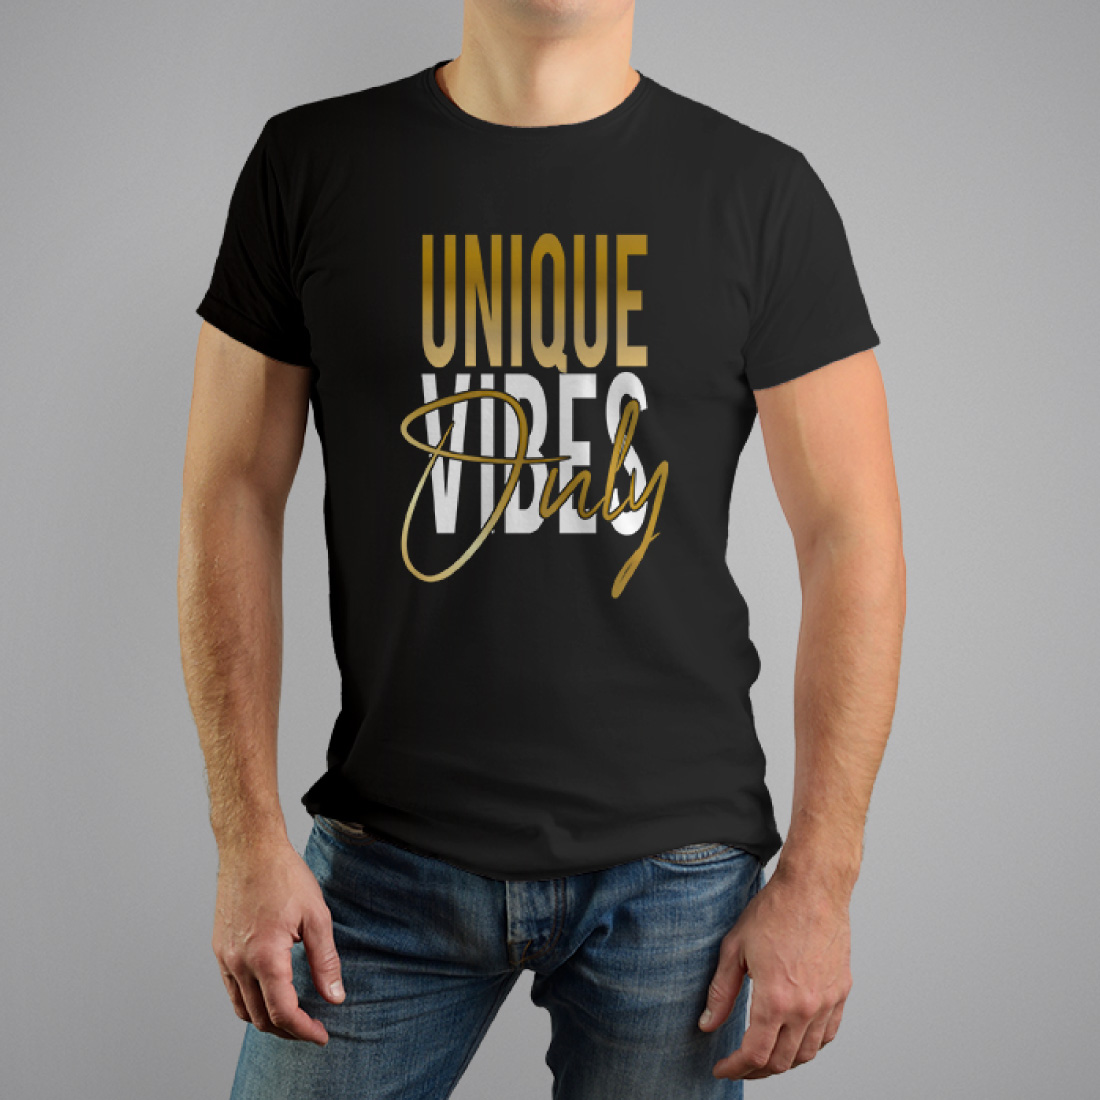 Unique vibes only tshirt design cover image.